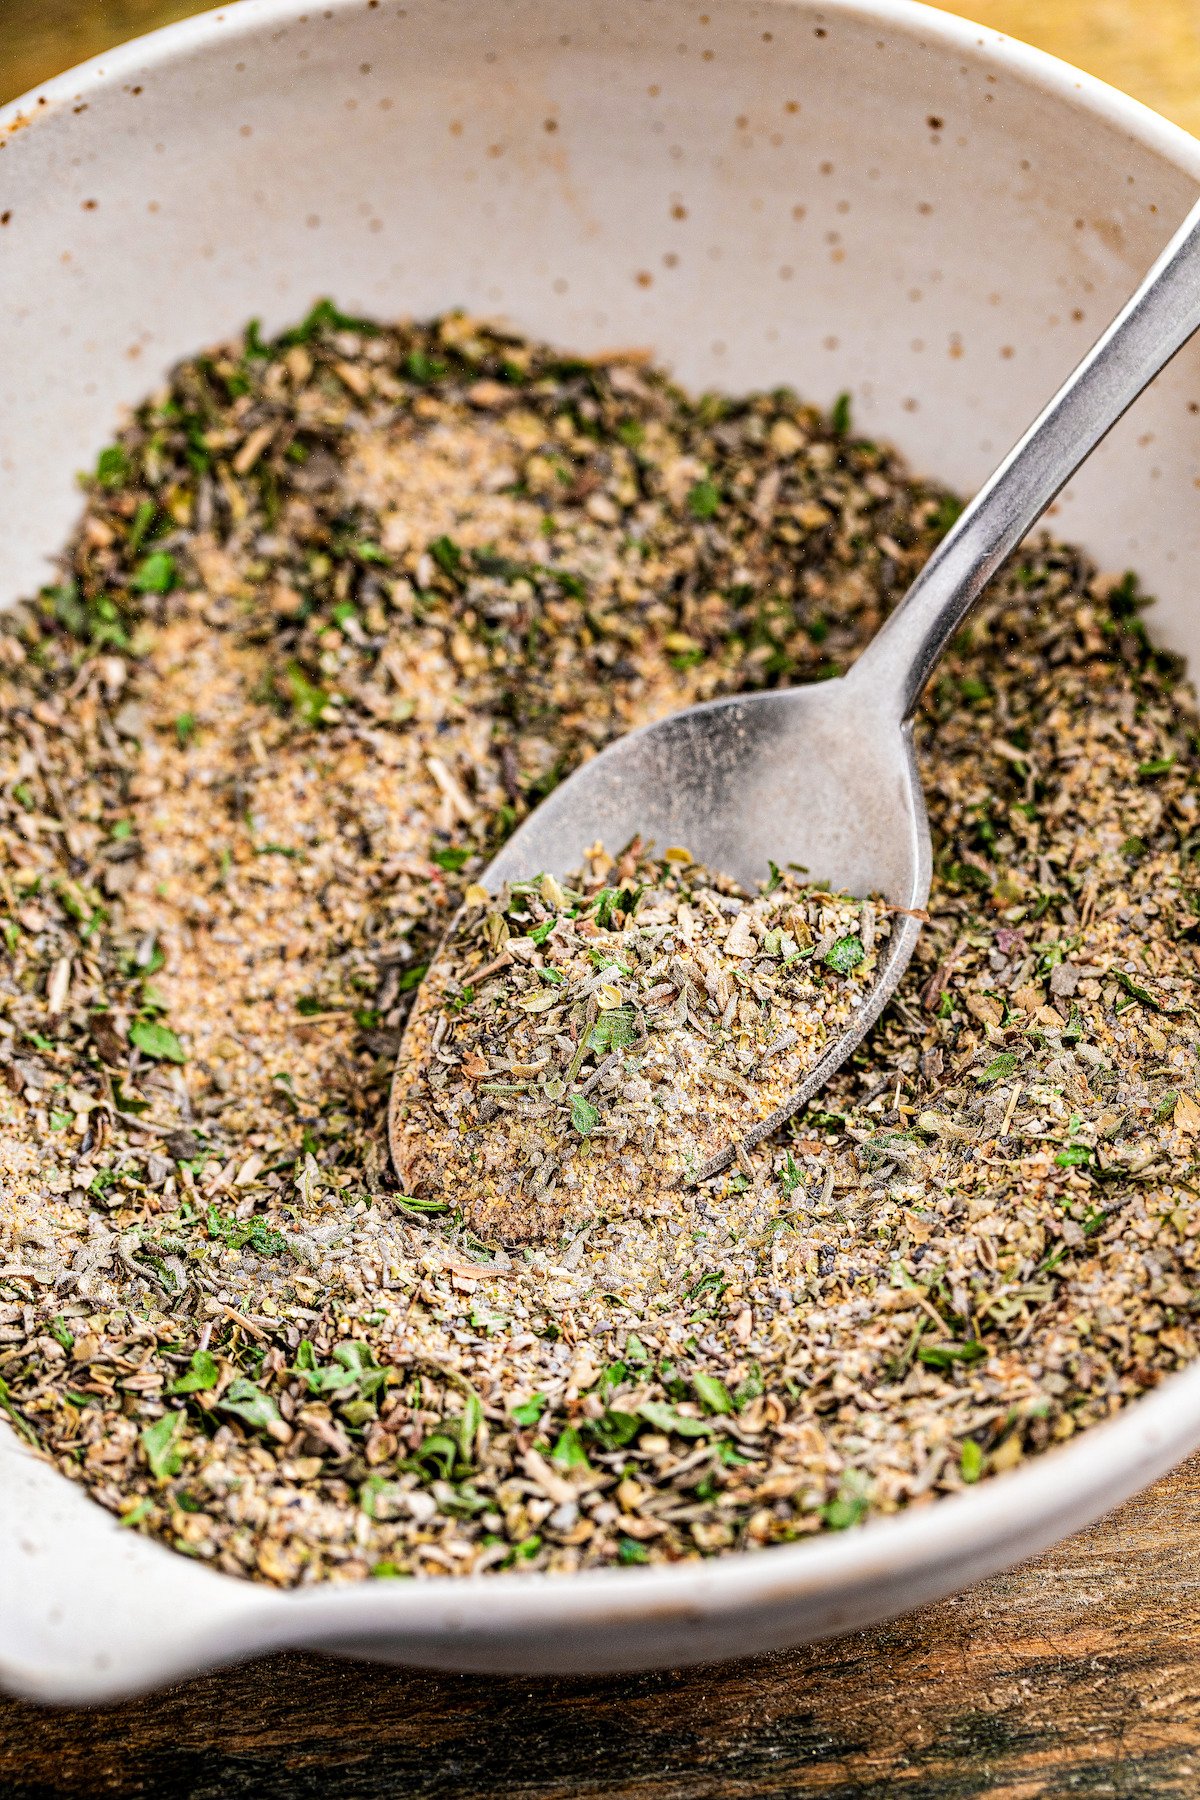 Spoonful of mixed dried herbs.